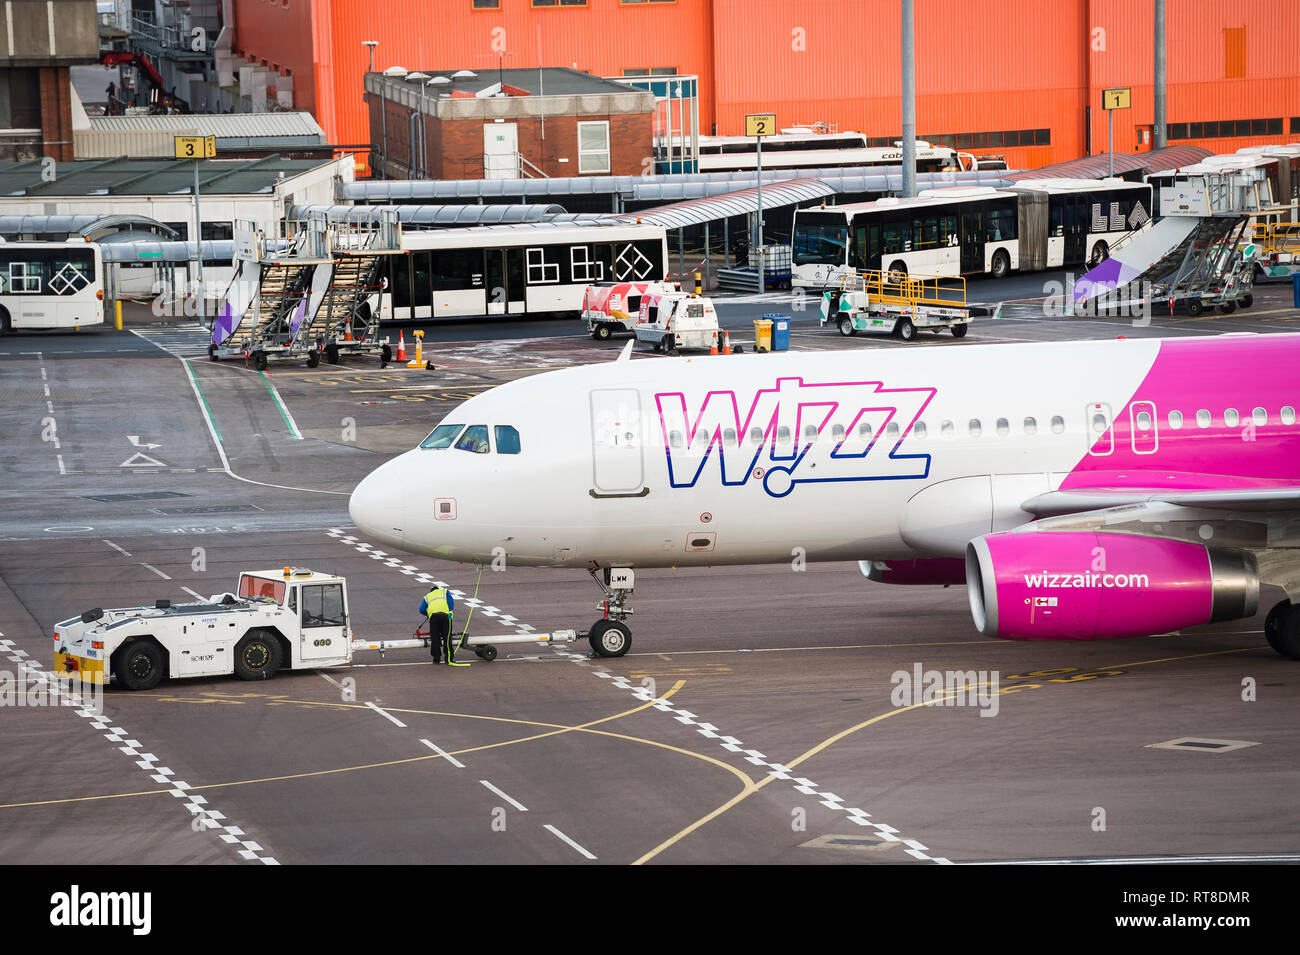 Wizz Air aeroplane being towed with a tug at Luton airport, England. Stock Photo